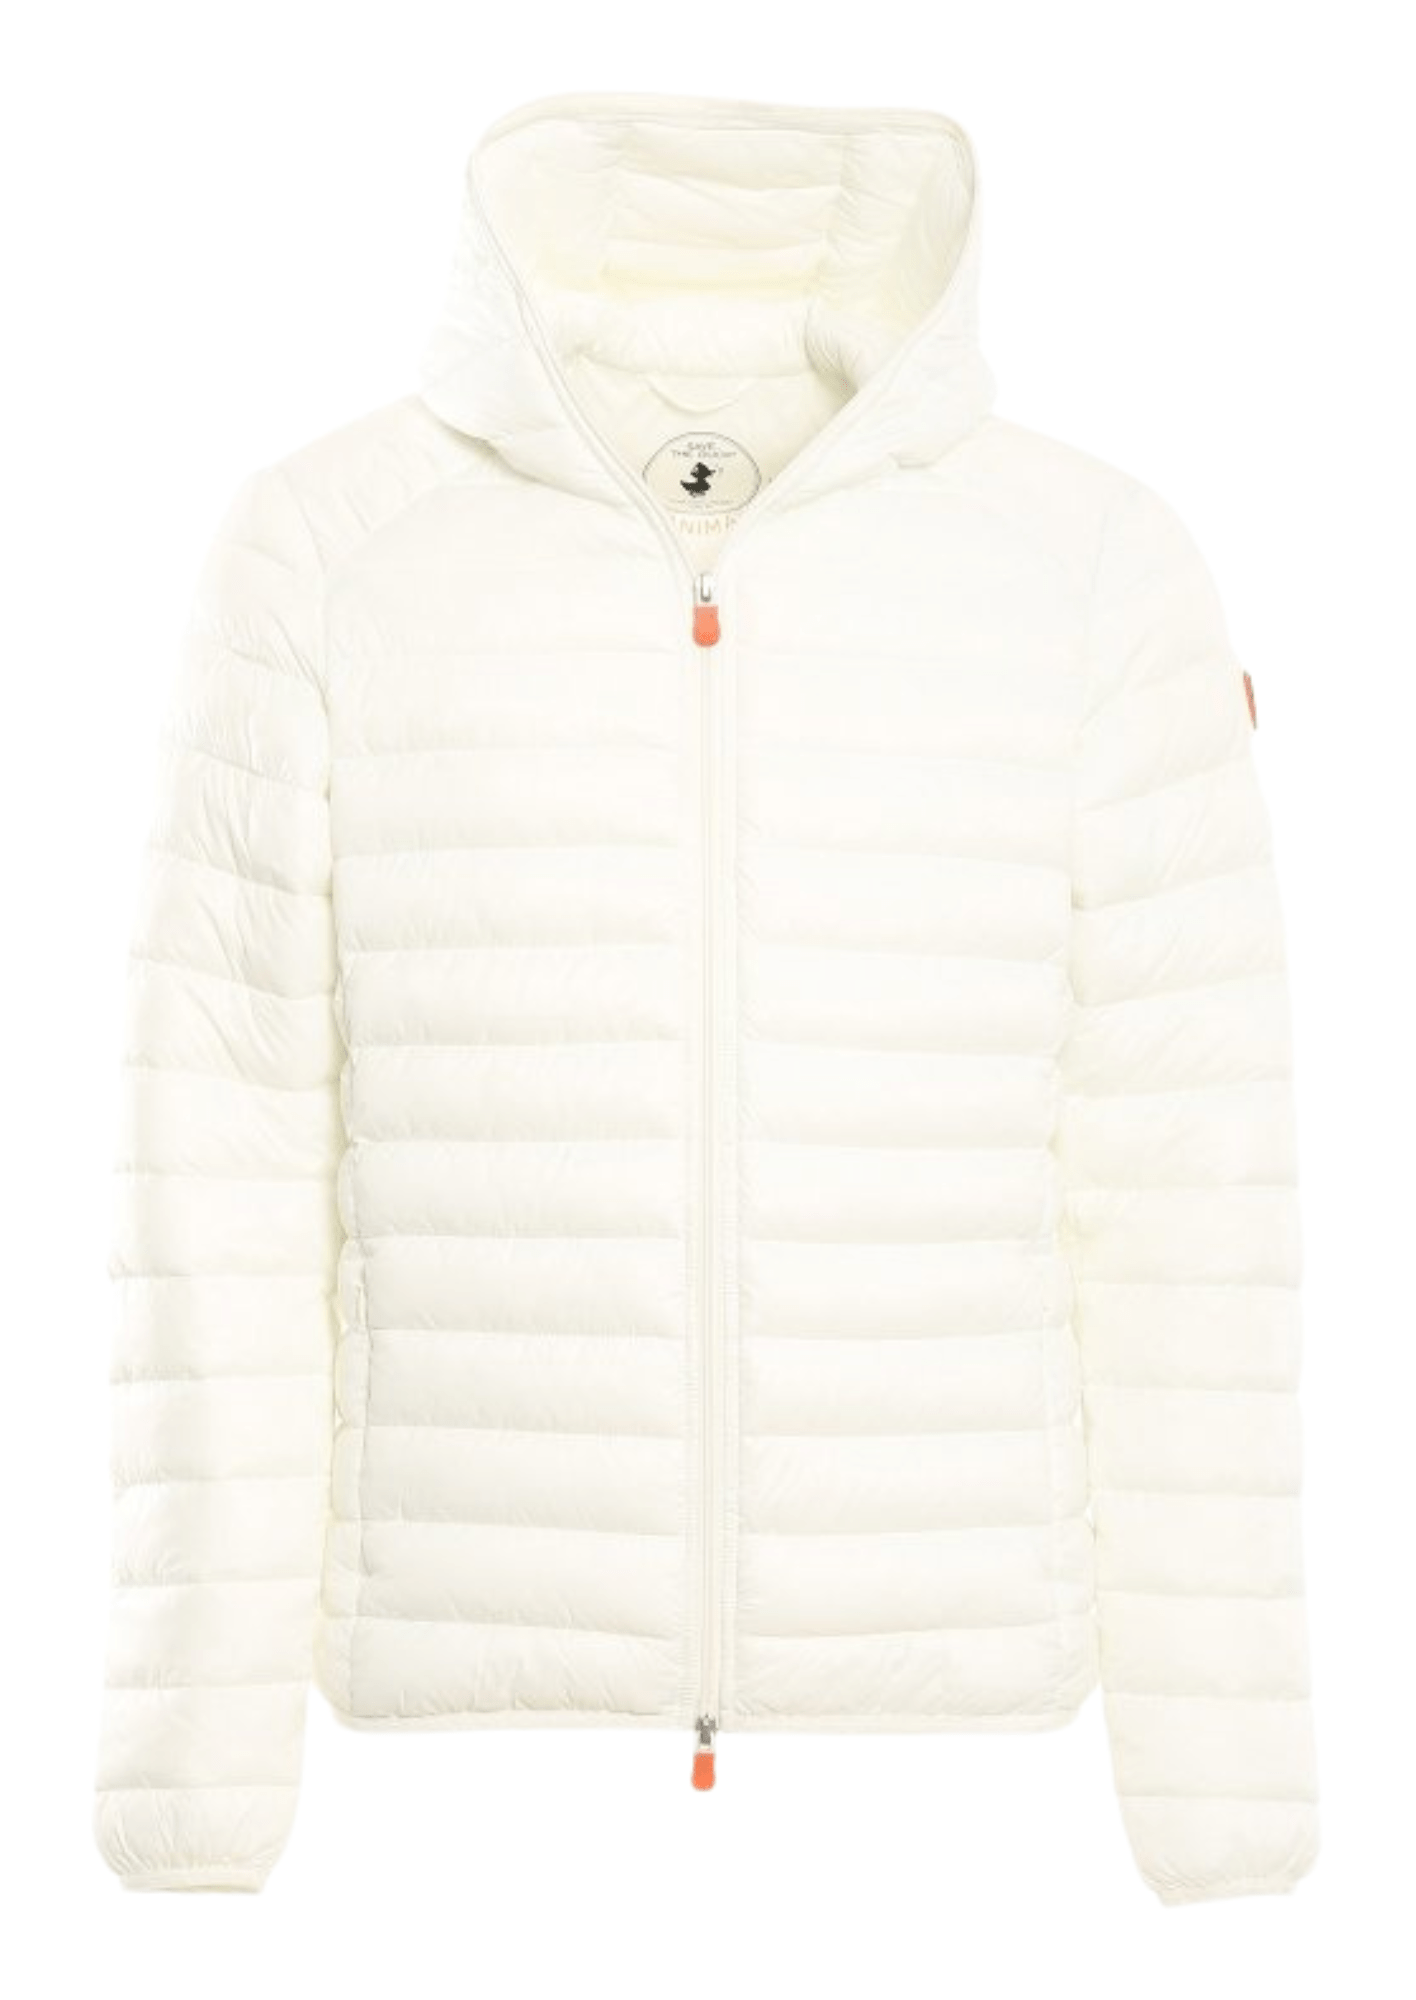 SAVE THE DUCK JACKET OFF WHITE / M DONALD HOODED JACKET